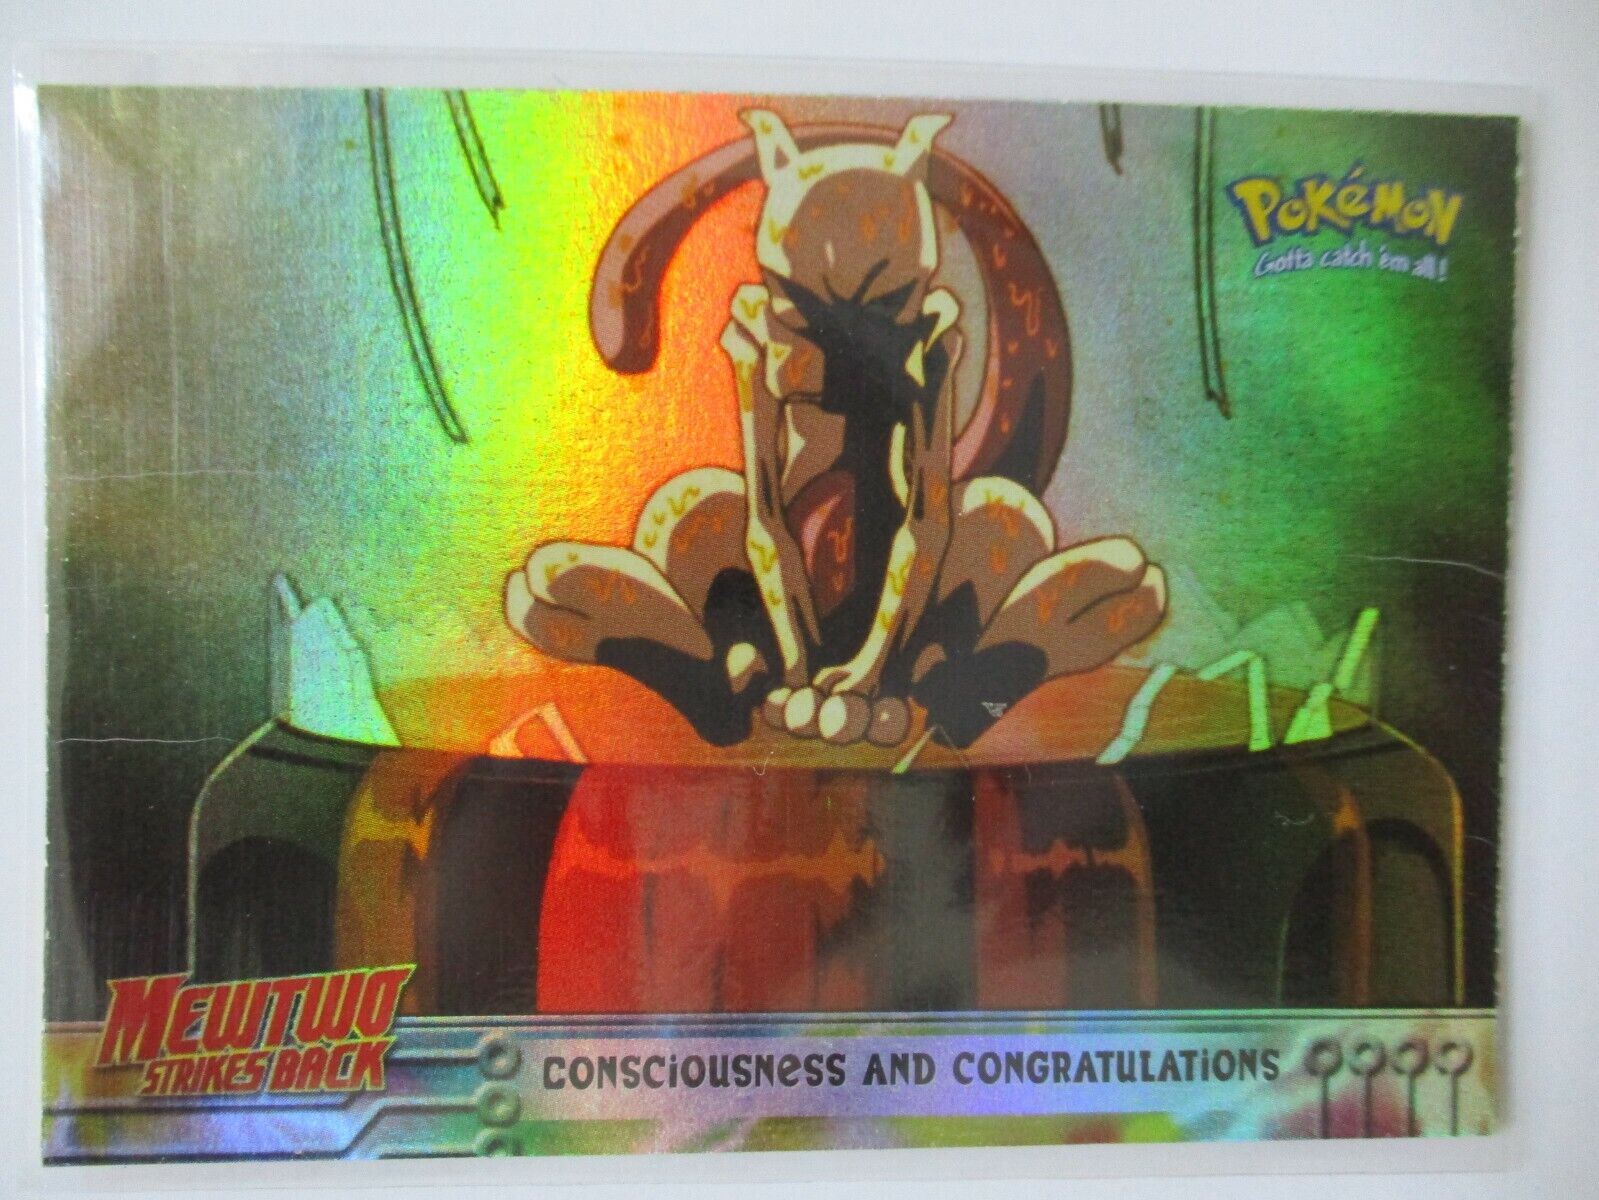 Pokemon The First Movie Foil Card #3 Mewtwo Consciousness and congratulations